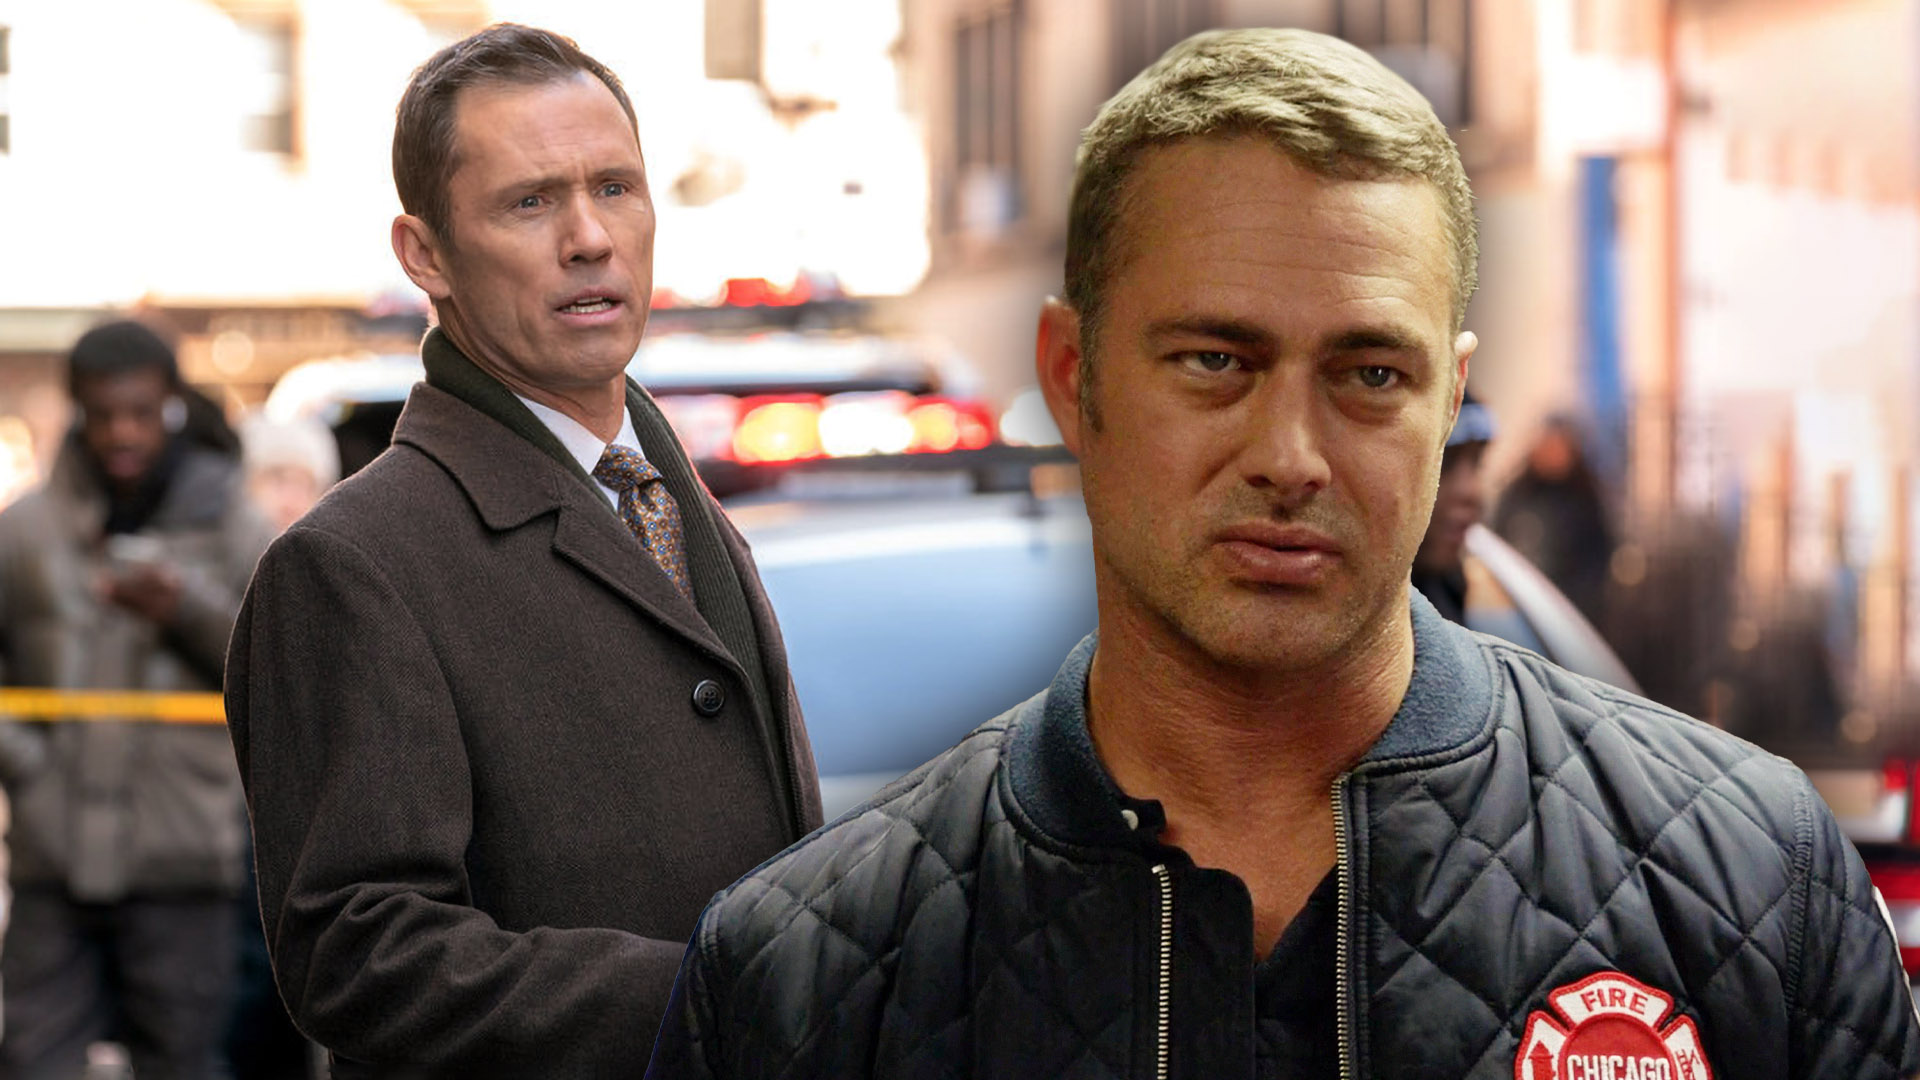 When Will Law & Order and Chicago One Return? NBC's Post-Strikes Programming Schedule Explained